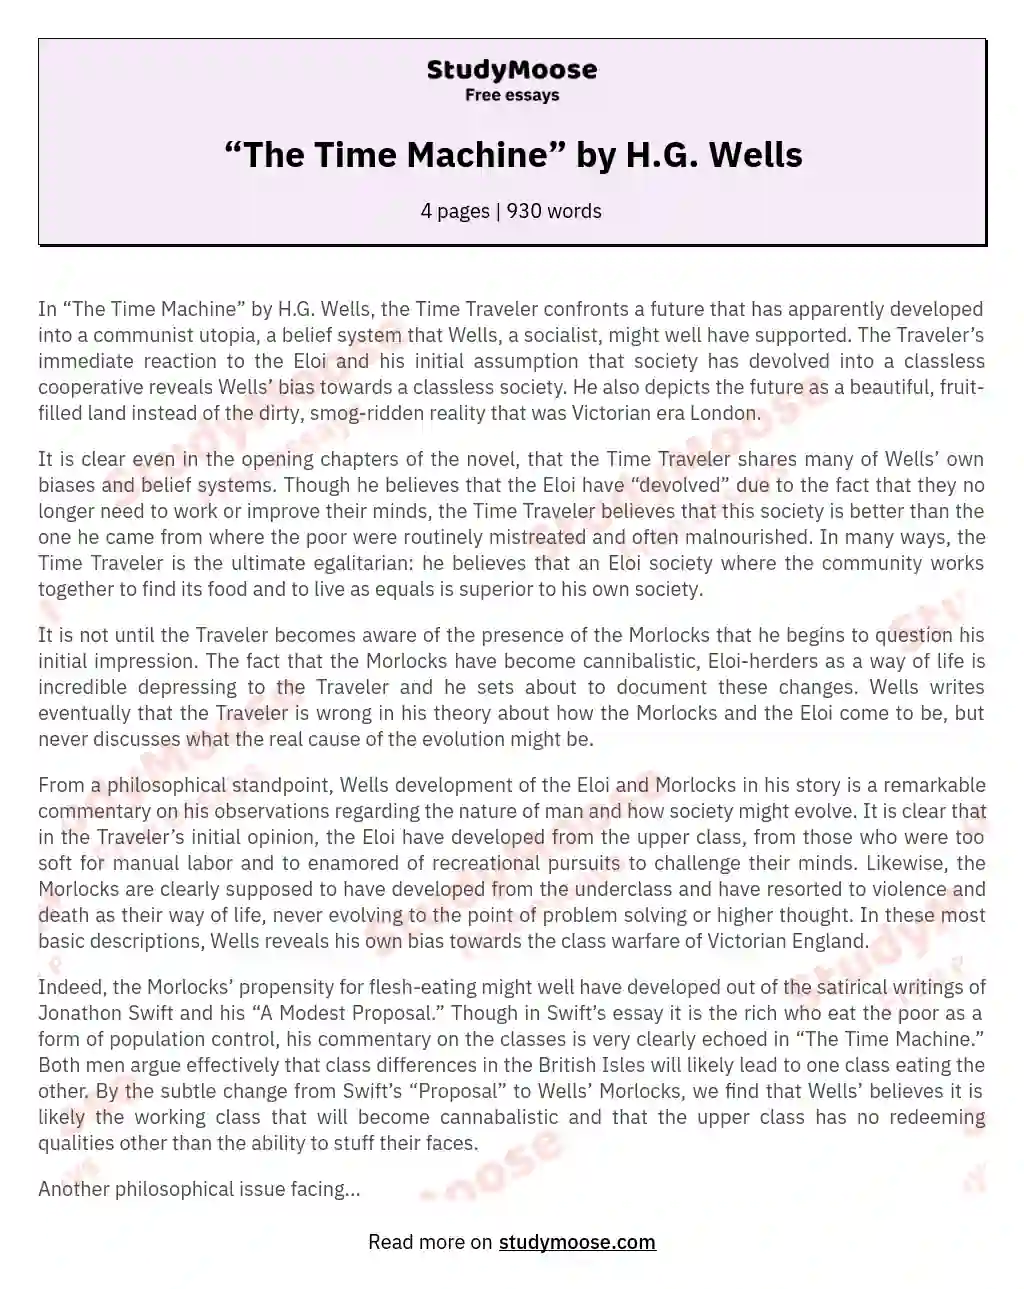 “The Time Machine” by H.G. Wells